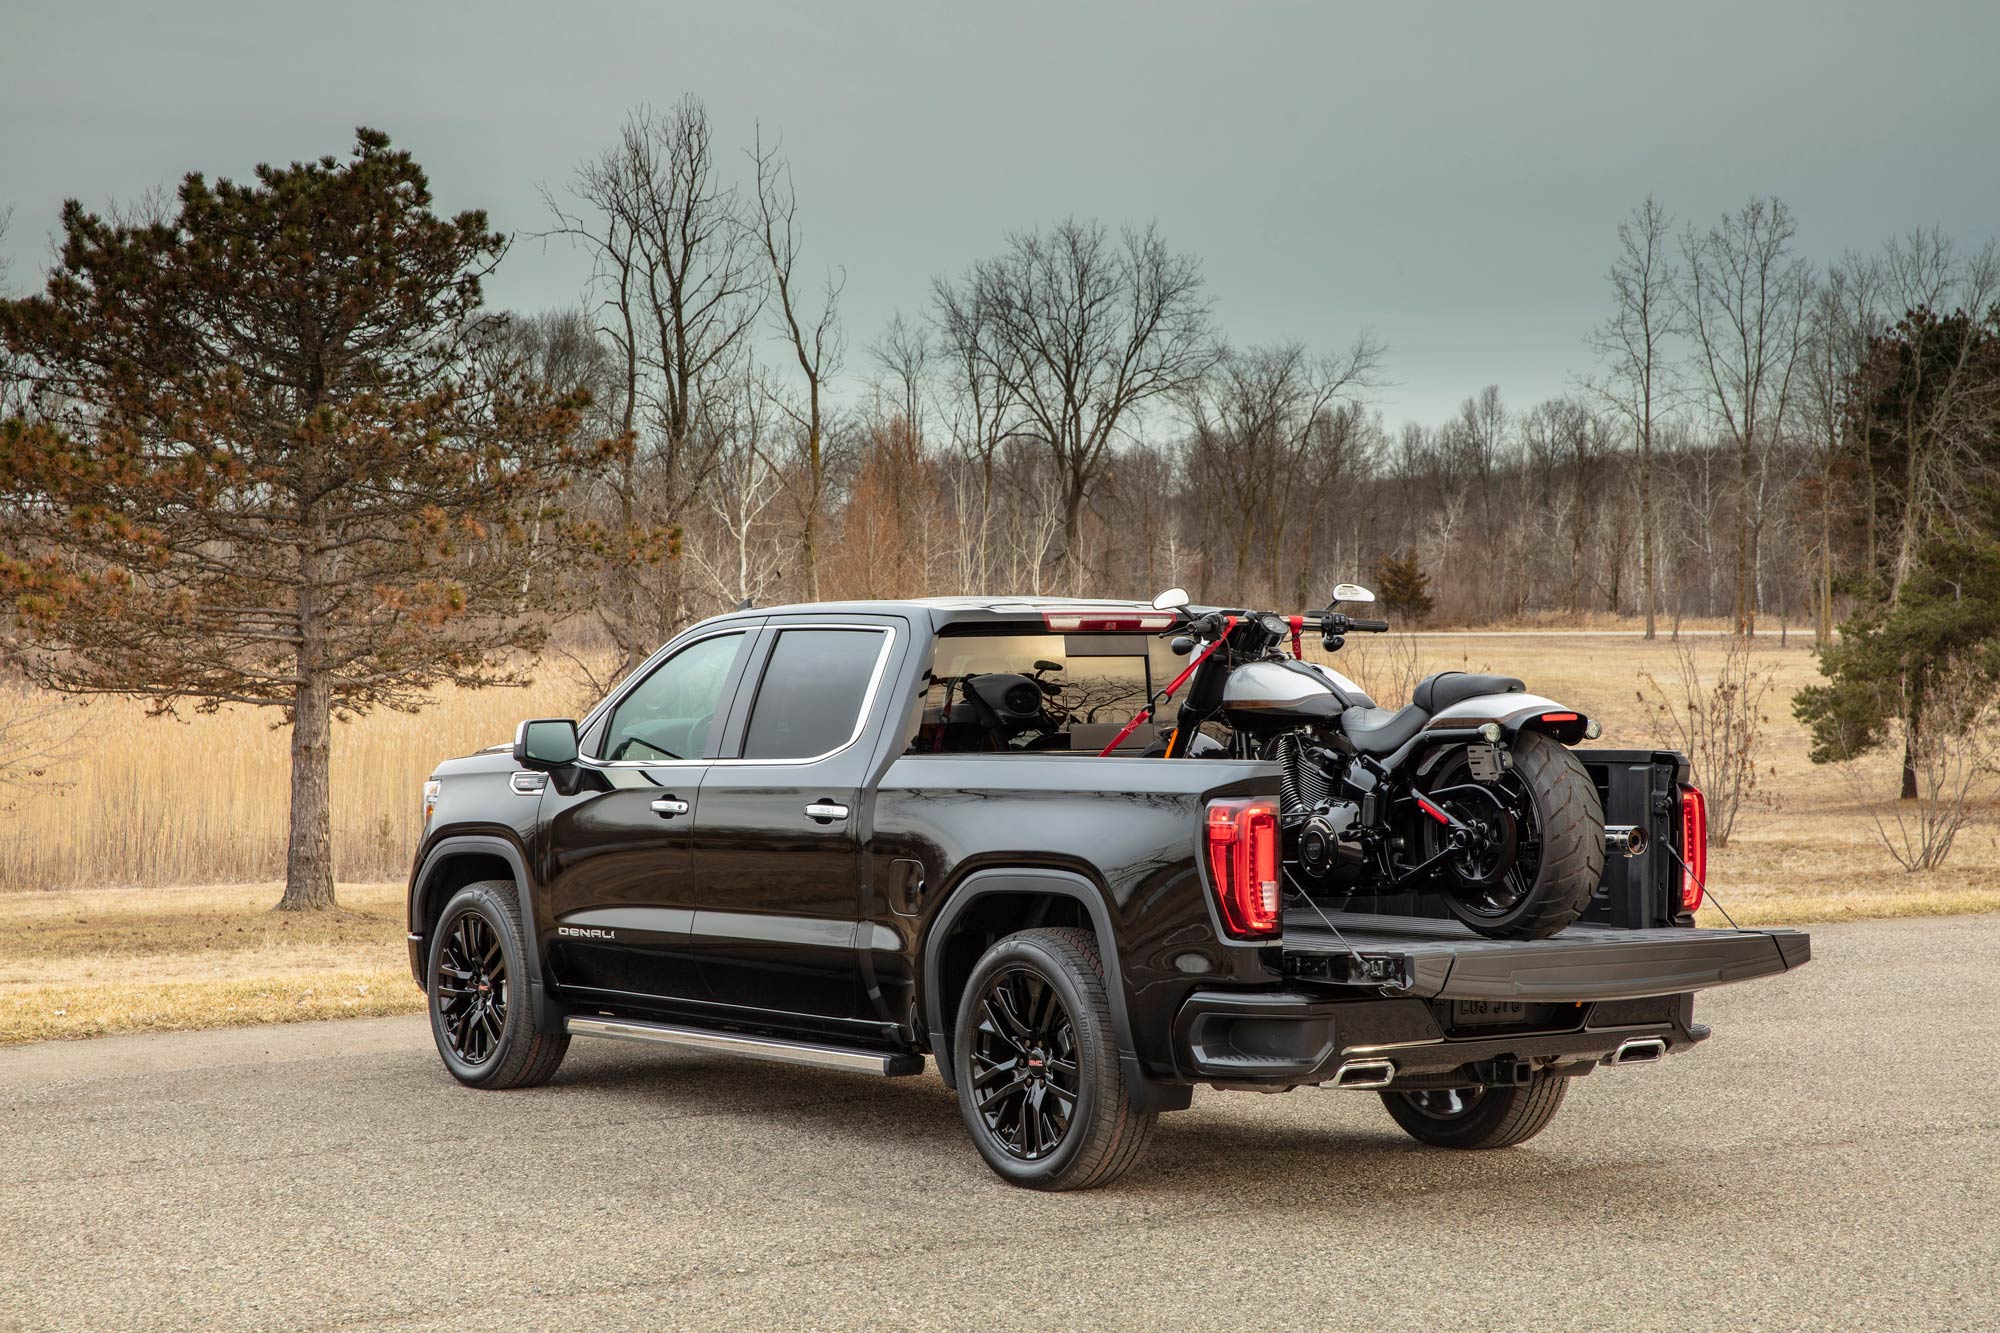 GMC Sierra 1500 with tailgate down and motorcycle in bed.